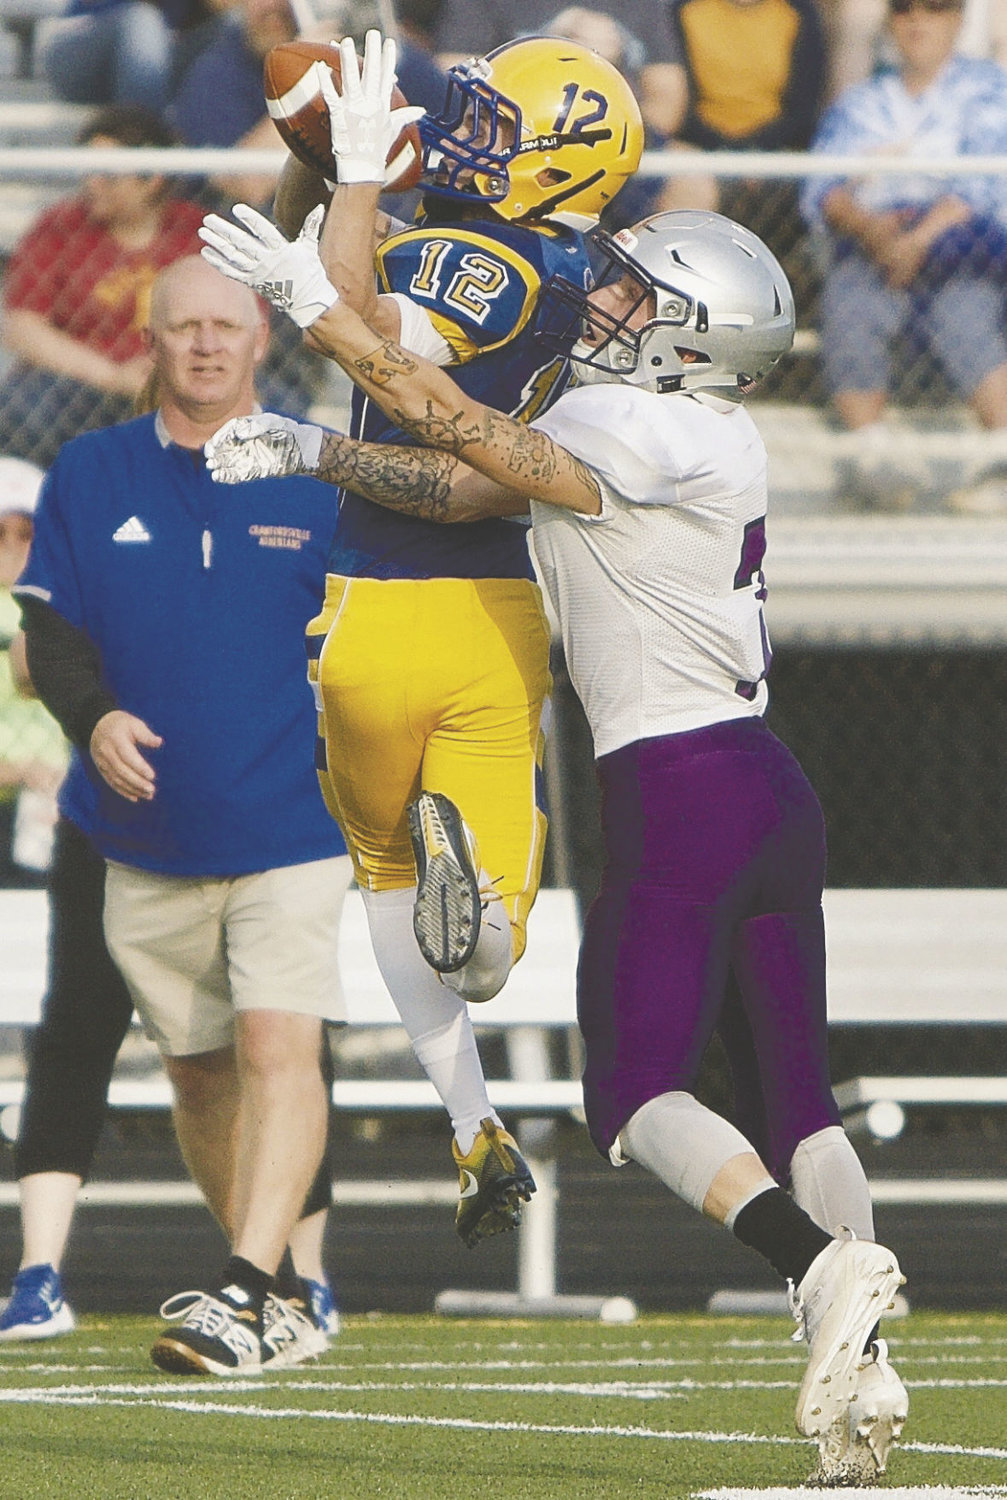 Crawfordsville first-year coach Kurt Schlicher as he looks on at Andrew Martin making a grab.